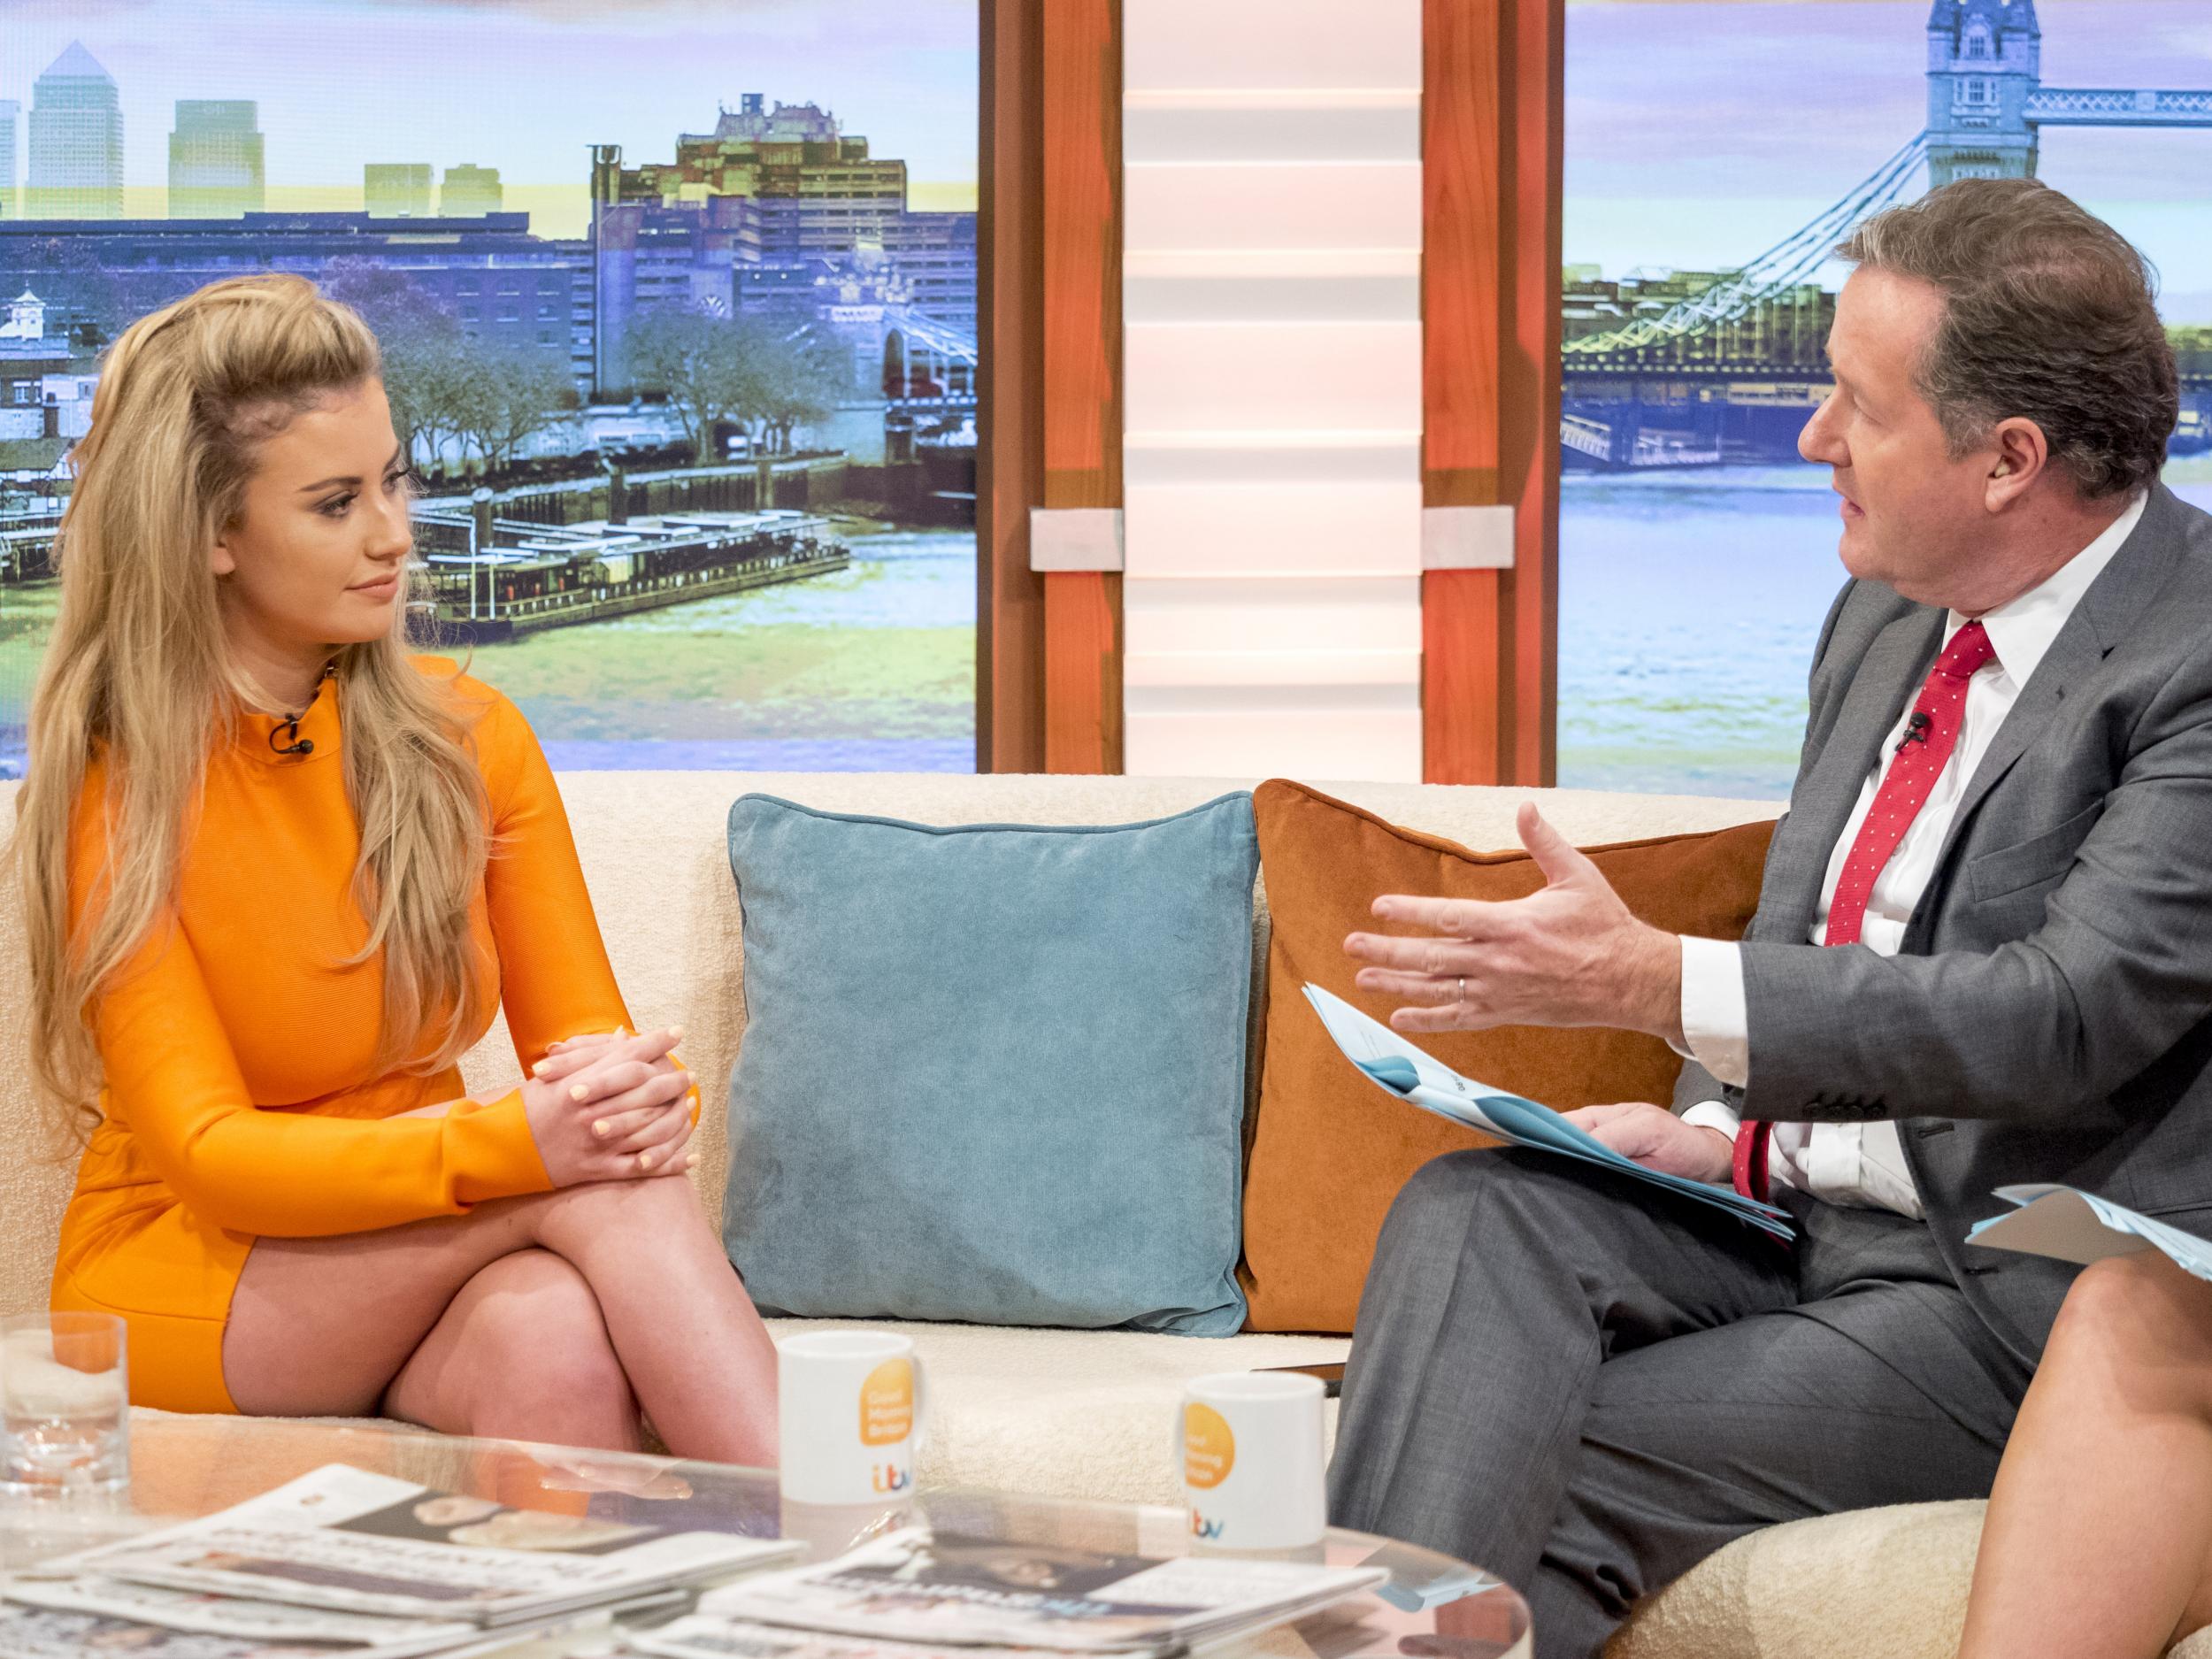 Piers Morgan interrogated Chloe Ayling during an appearance on Good Morning Britain